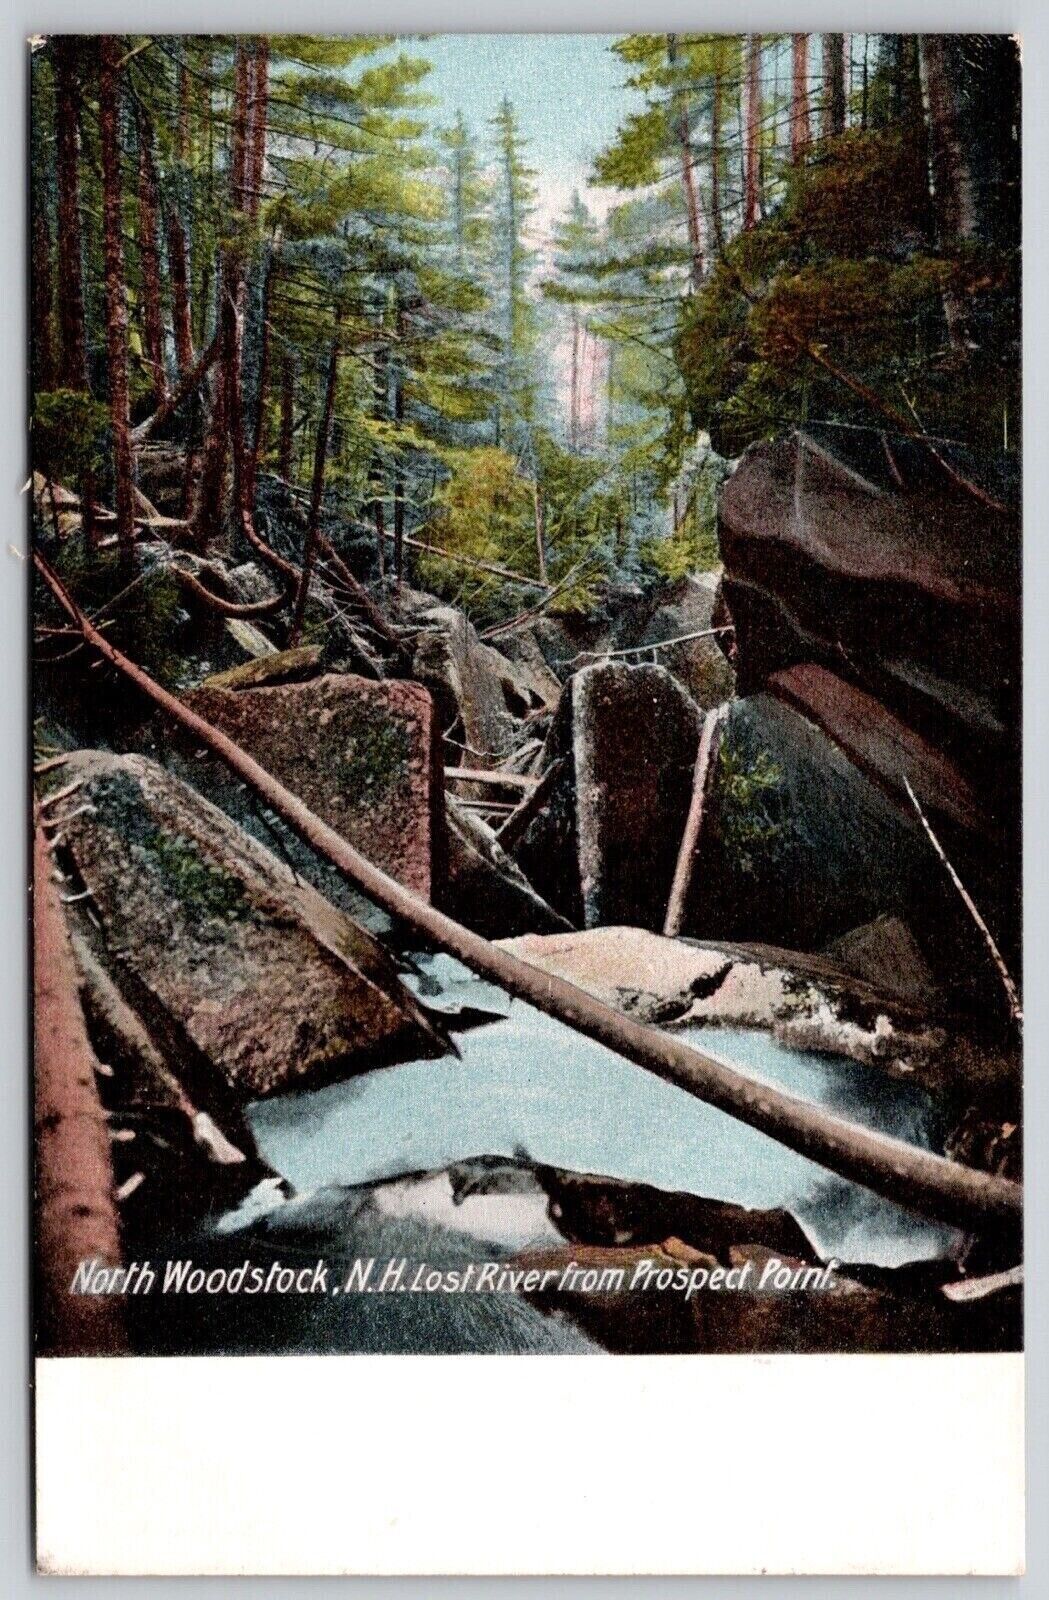 North Woodstock New Hampshire Nh Lost River Prospect Point Antique Postcard